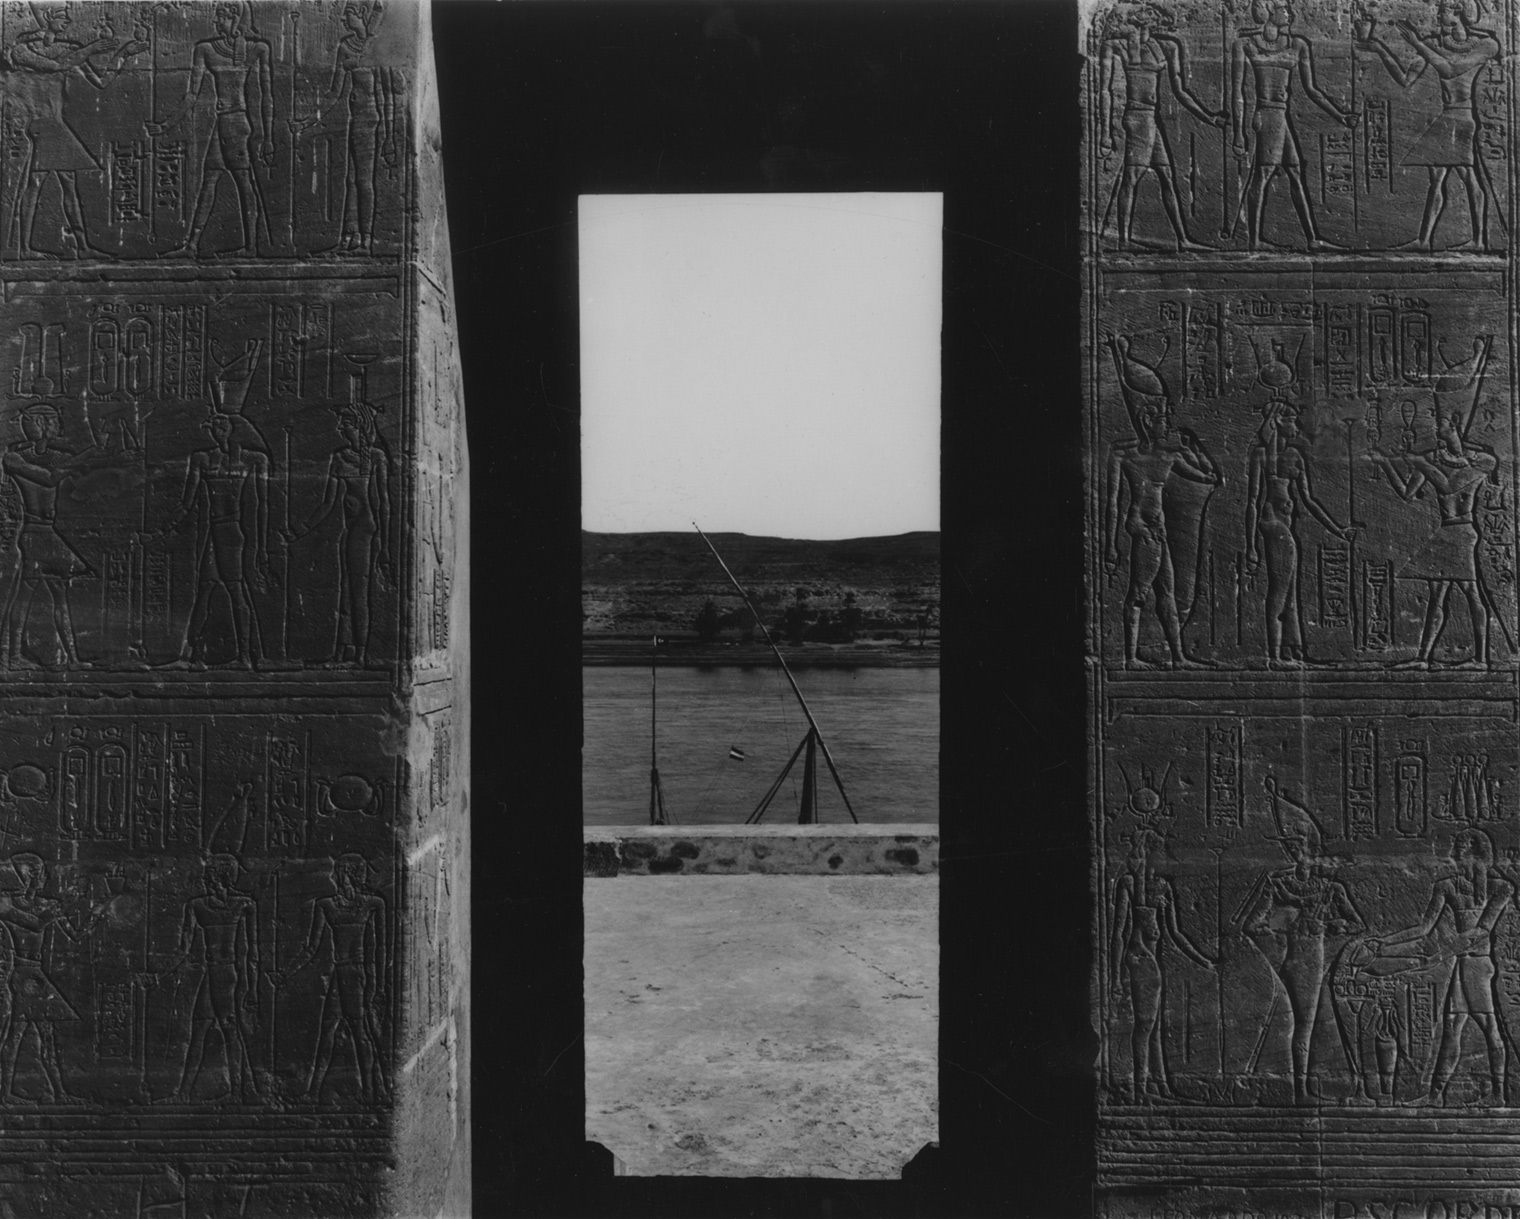 A black and white photograph of the view from the gateway of the Temple of Dendur, looking towards the Nile.